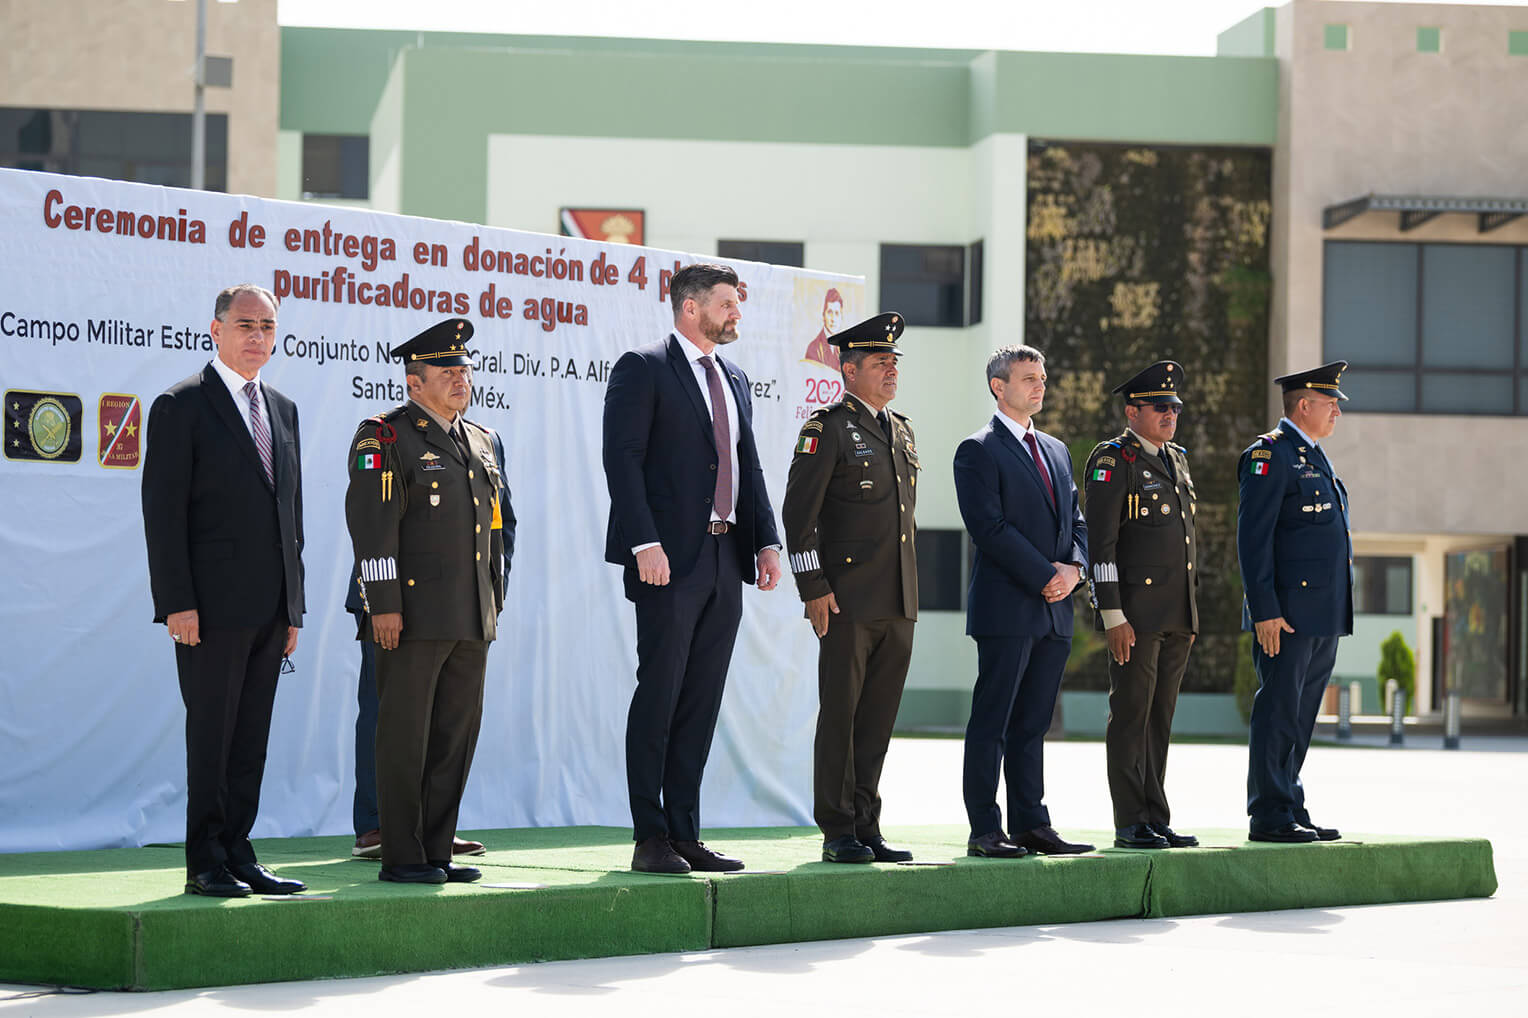 Edward Graham, chief operating officer, and Dave Philips, deputy director of international projects, stand with Mexican leaders at the recent handover ceremony.